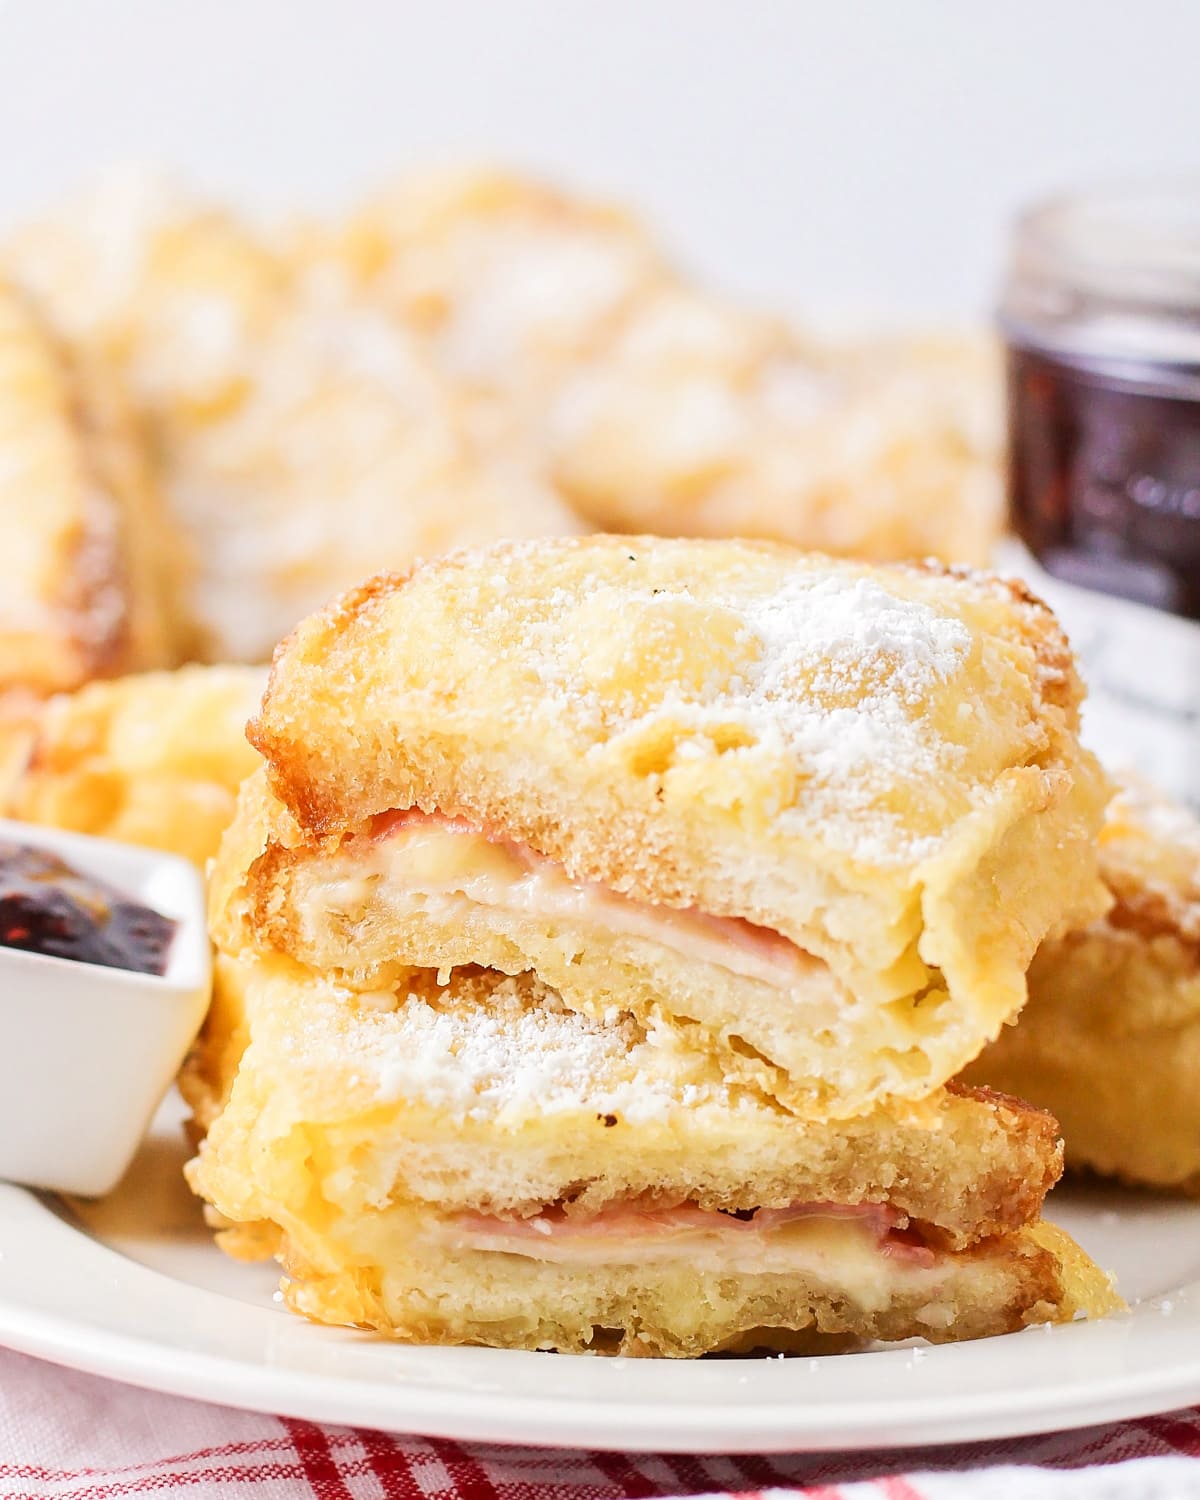 Monte cristo sandwich cut in half and stacked on top of each other on white plate.